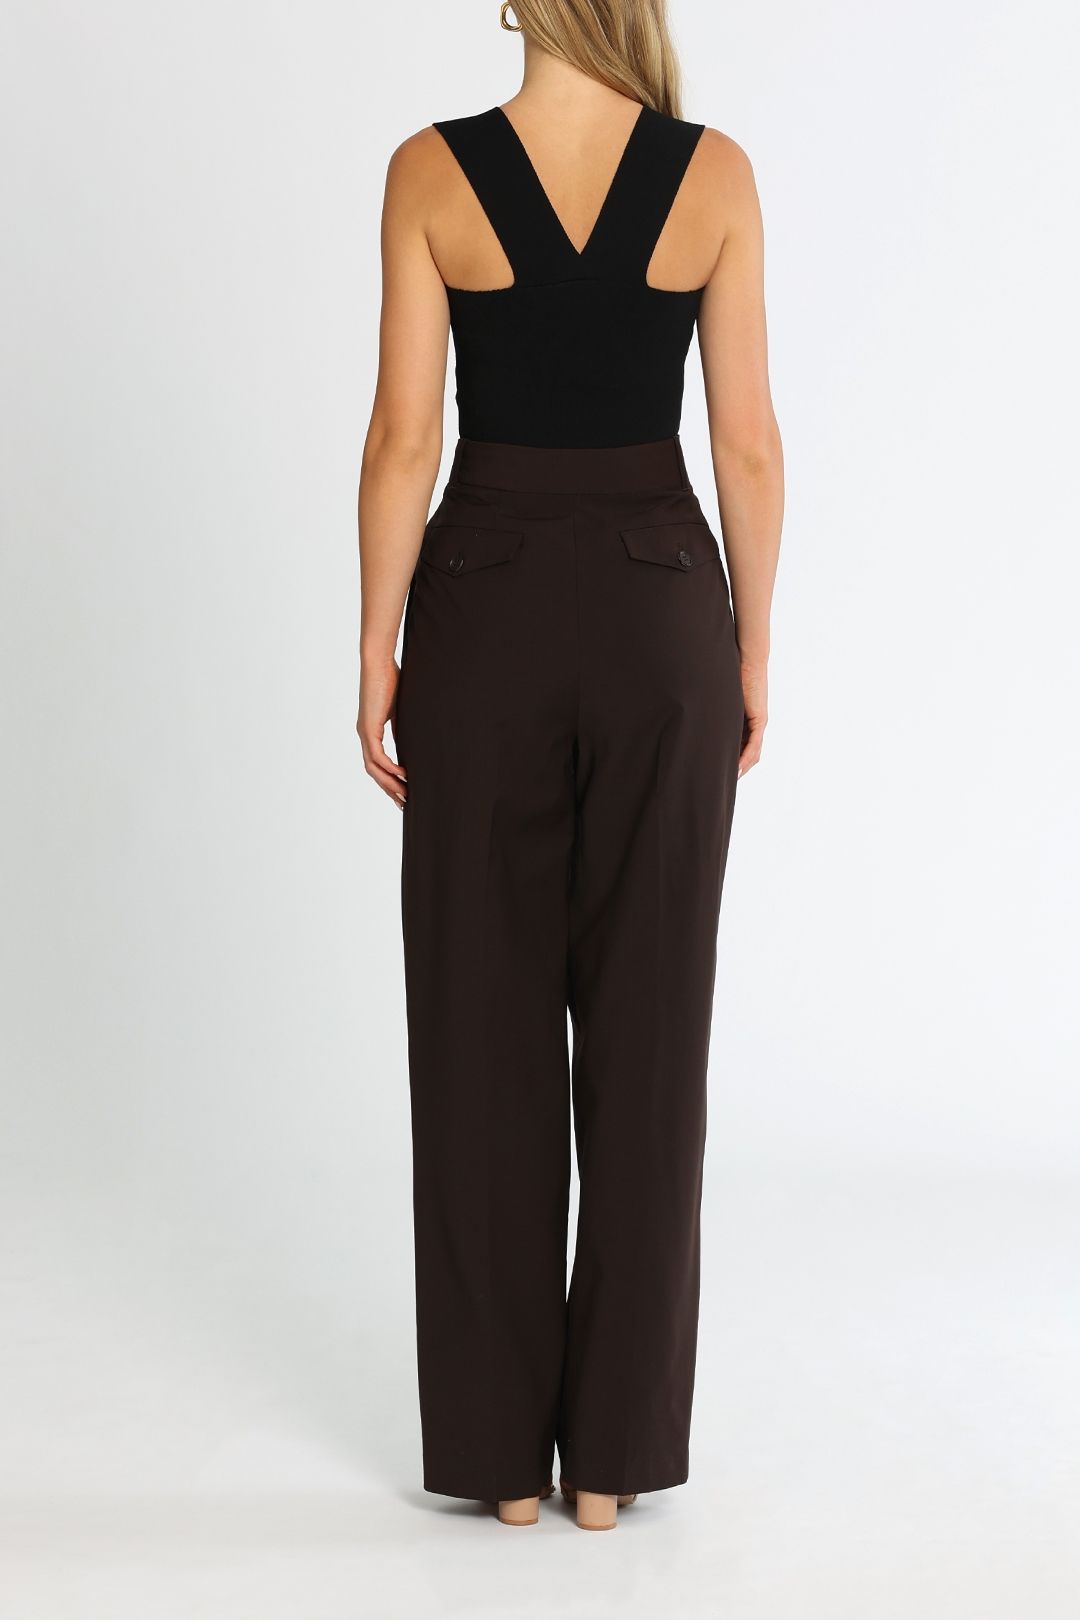 Camilla and Marc Artie Pant Dark Chocolate Back Pockets